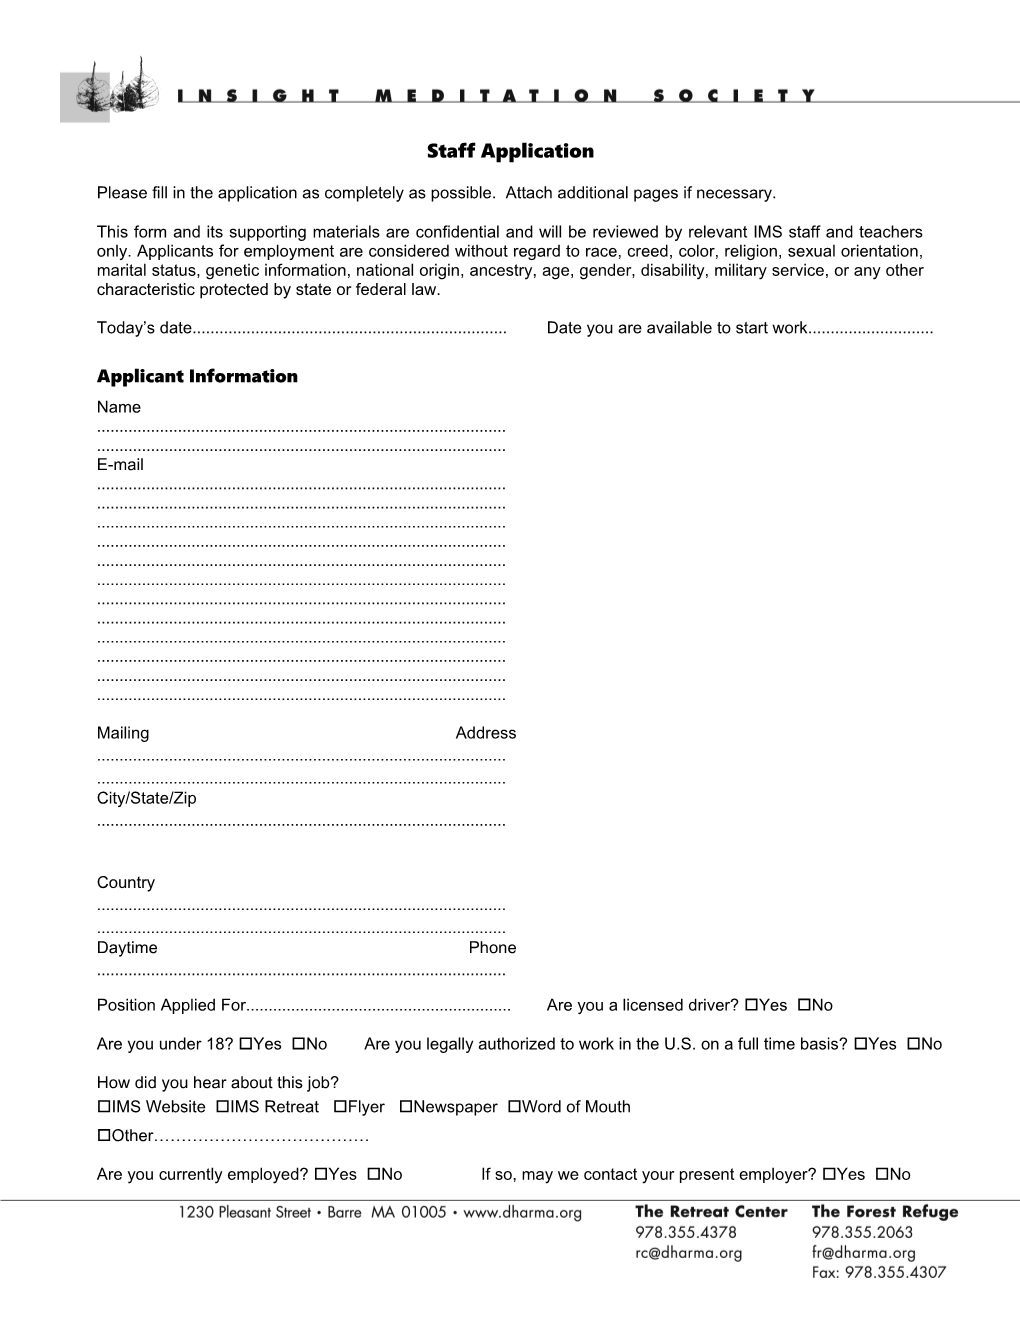 Please Fill in the Application As Completely As Possible. Attach Additional Pages If Necessary